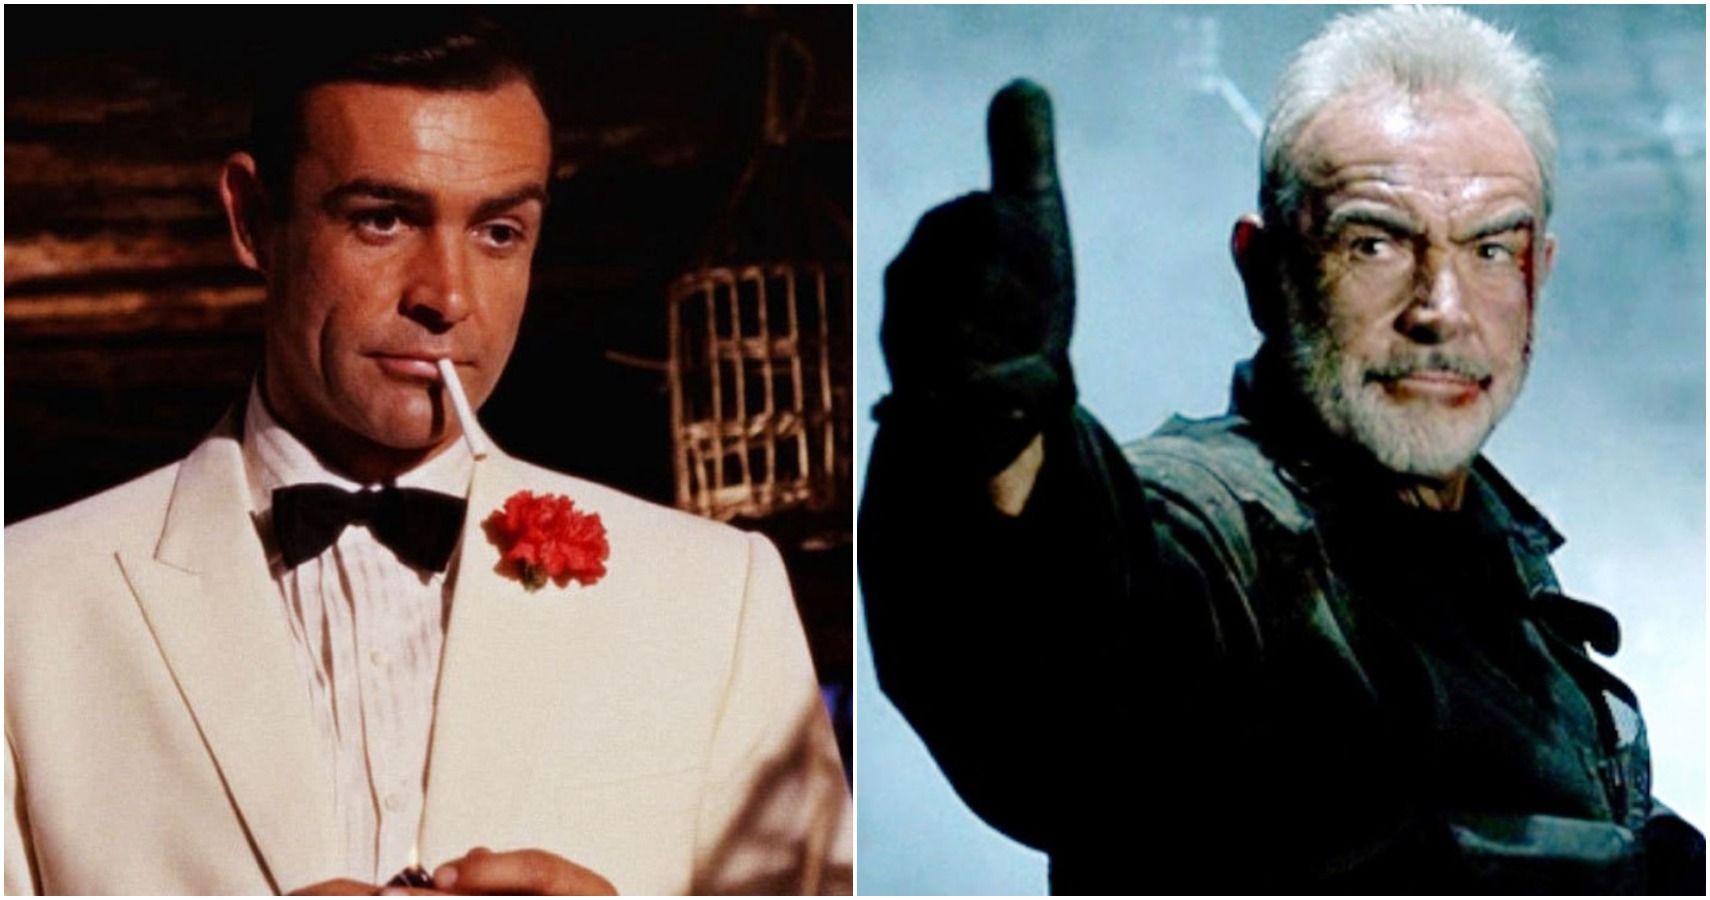 Sean Connery His 5 Best 5 Worst Roles According To Imdb.